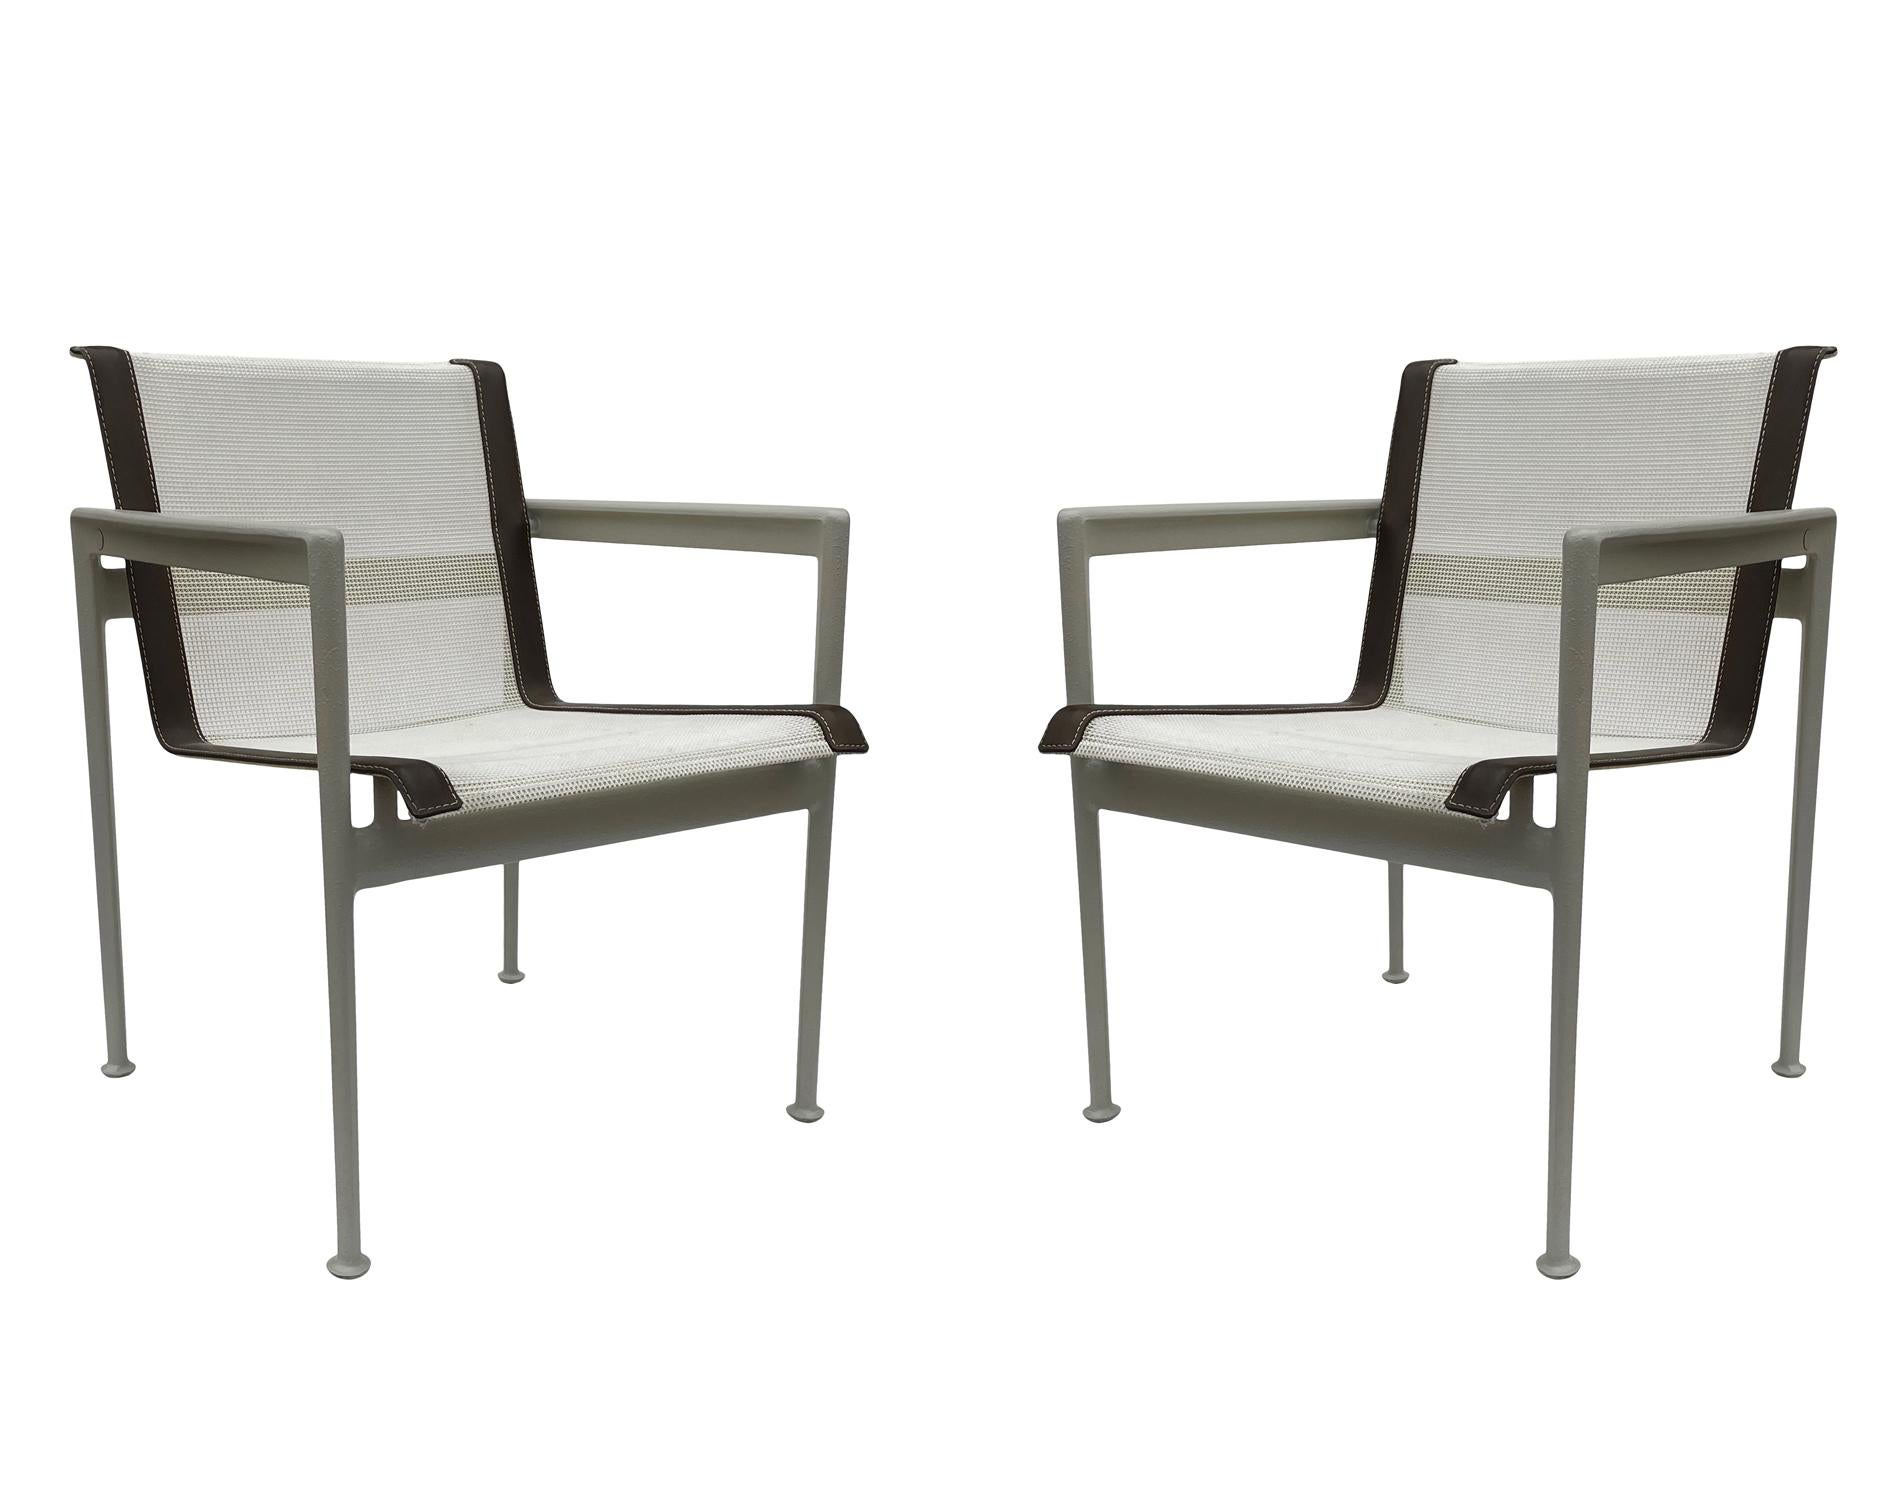 Matching Pair of Mid-Century Modern Outdoor Patio Armchairs by Richard Schultz 2